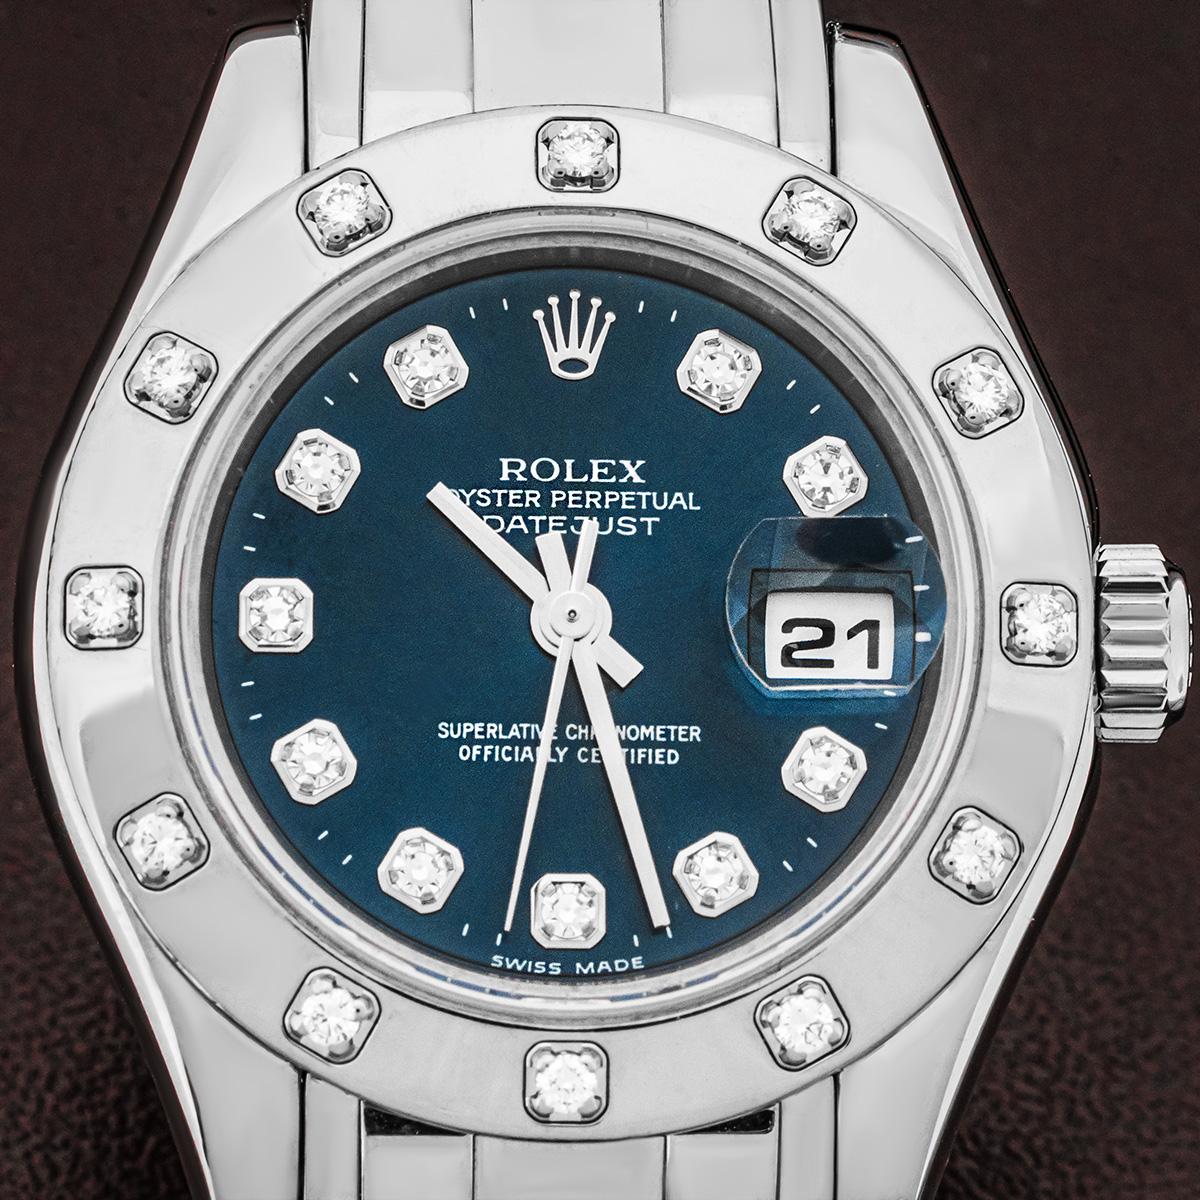 A white gold ladies Datejust pearlmaster by Rolex. Featuring a blue diamond dial with a white gold bezel set with 12 round brilliant cut diamonds. The watch is also fitted with a sapphire crystal, a self-winding automatic movement and a white gold